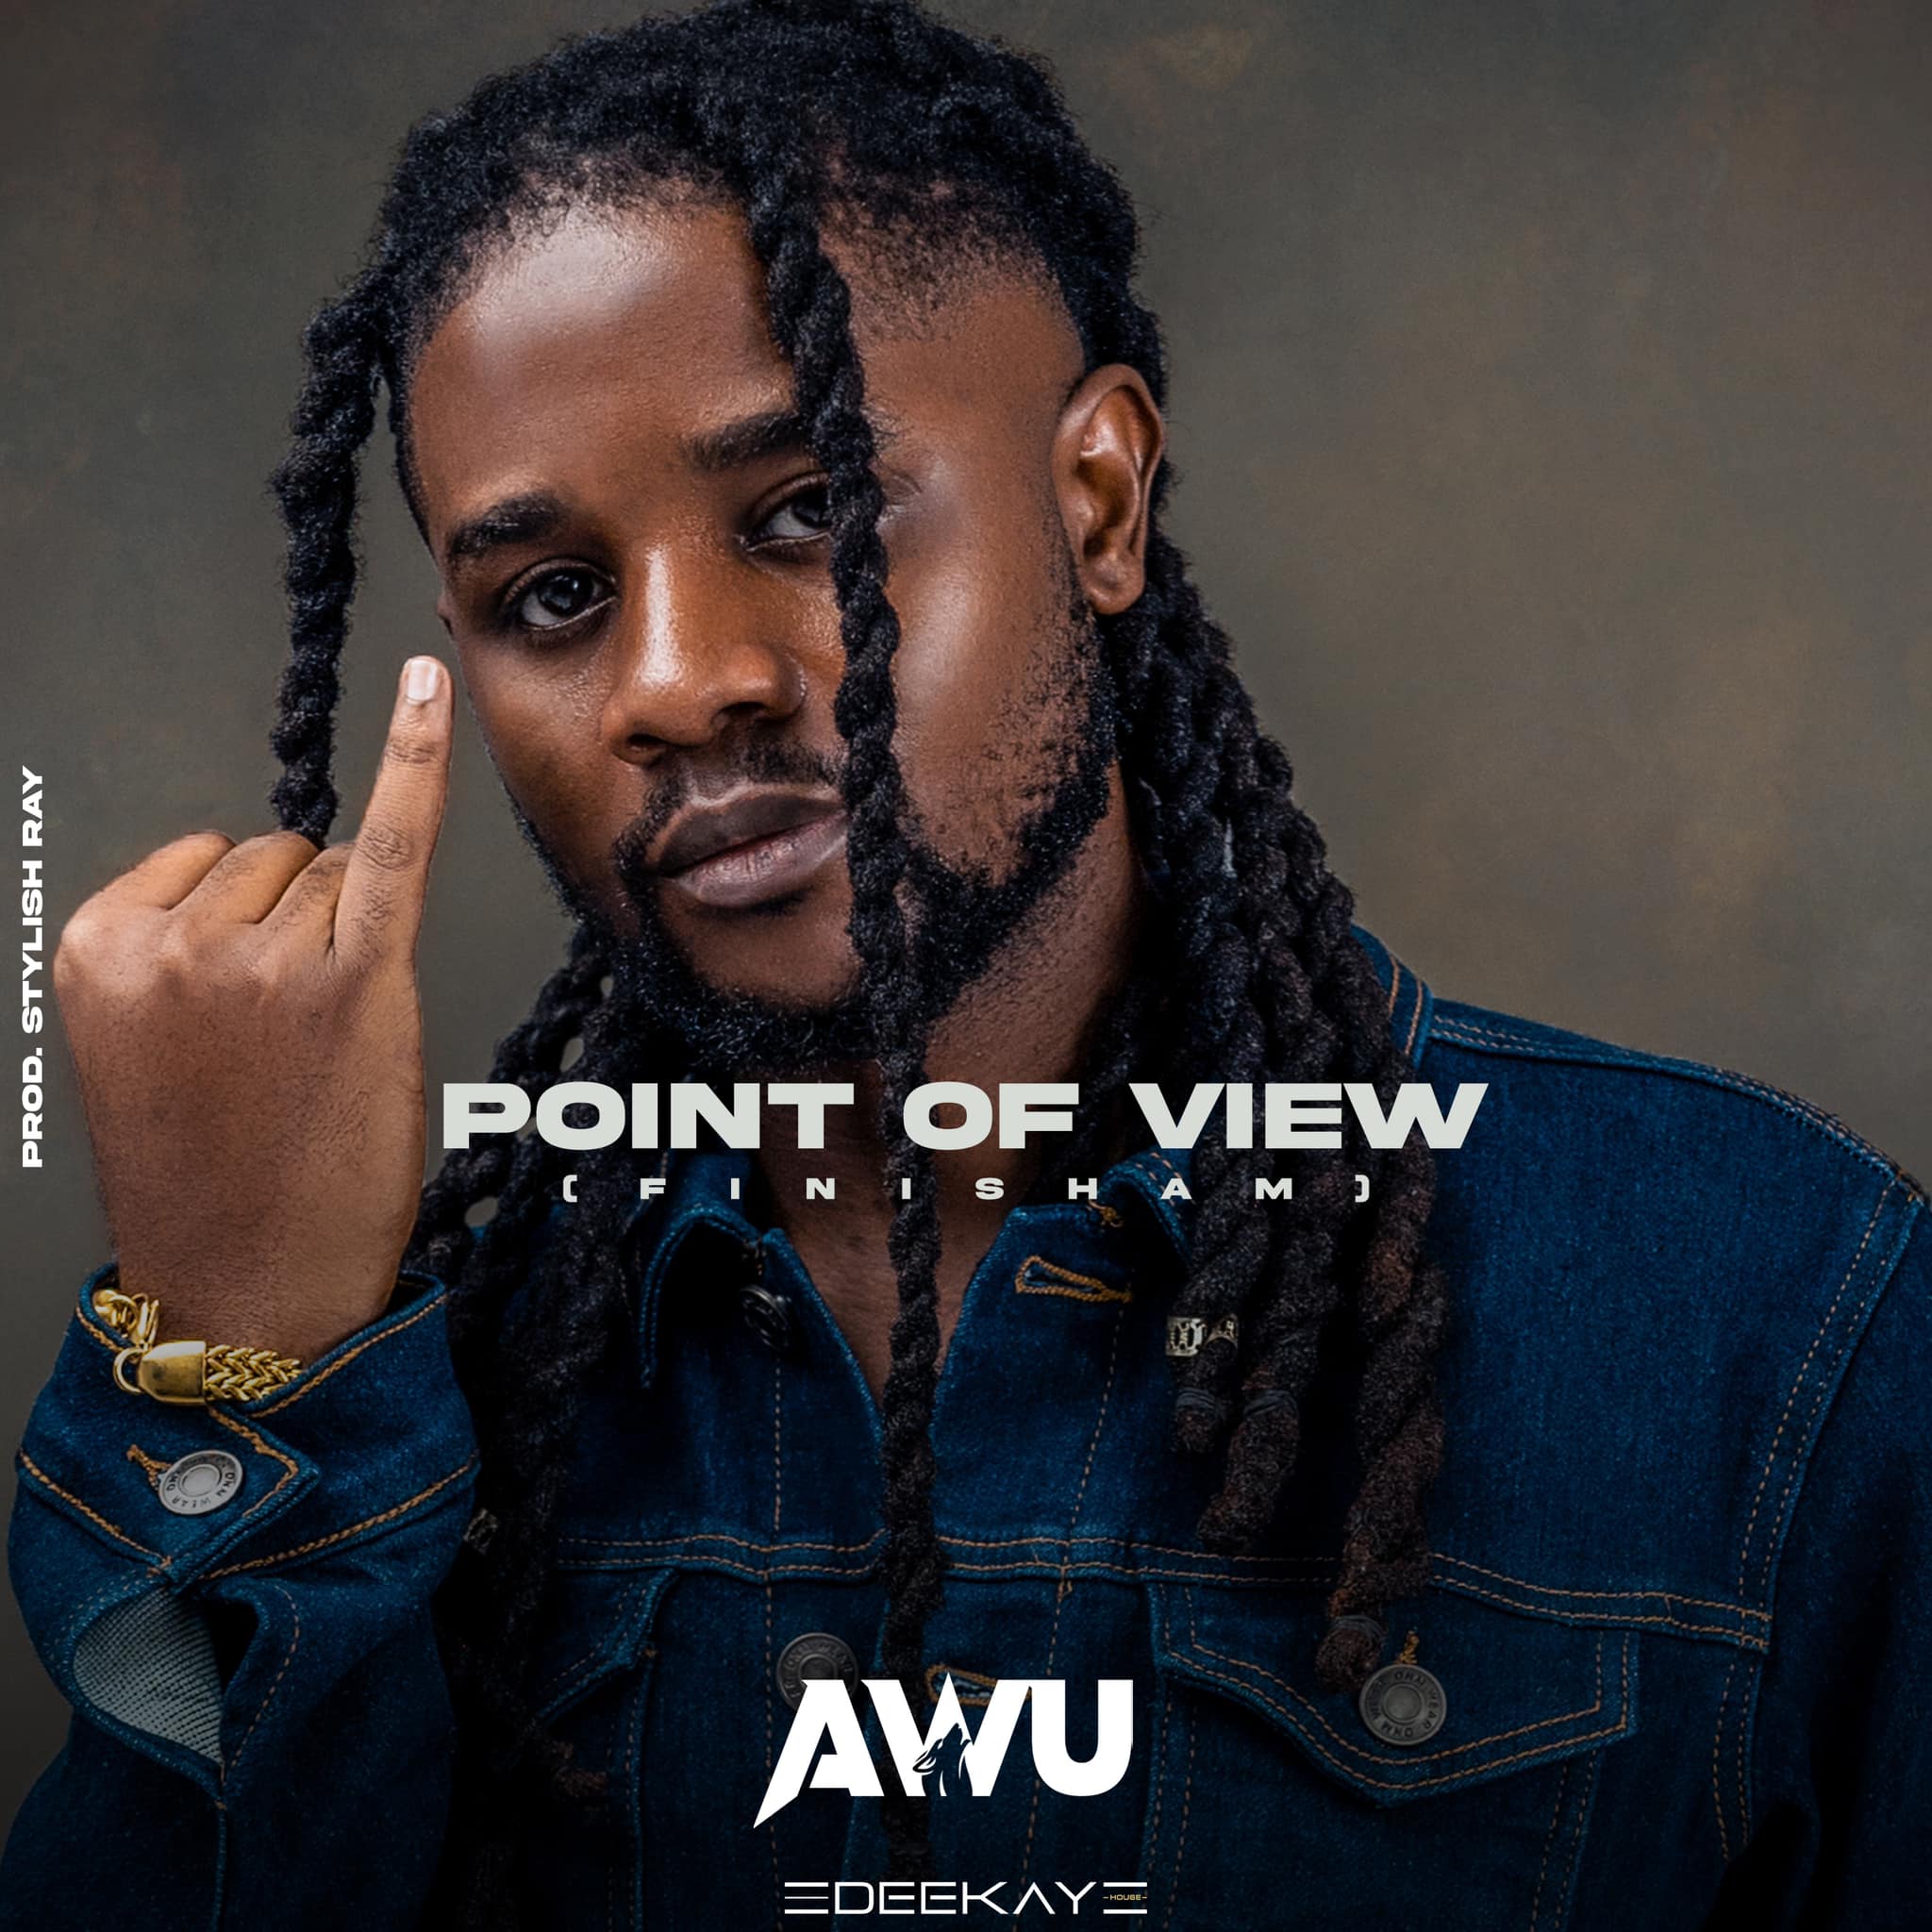 Awu - Point of View (artwork)